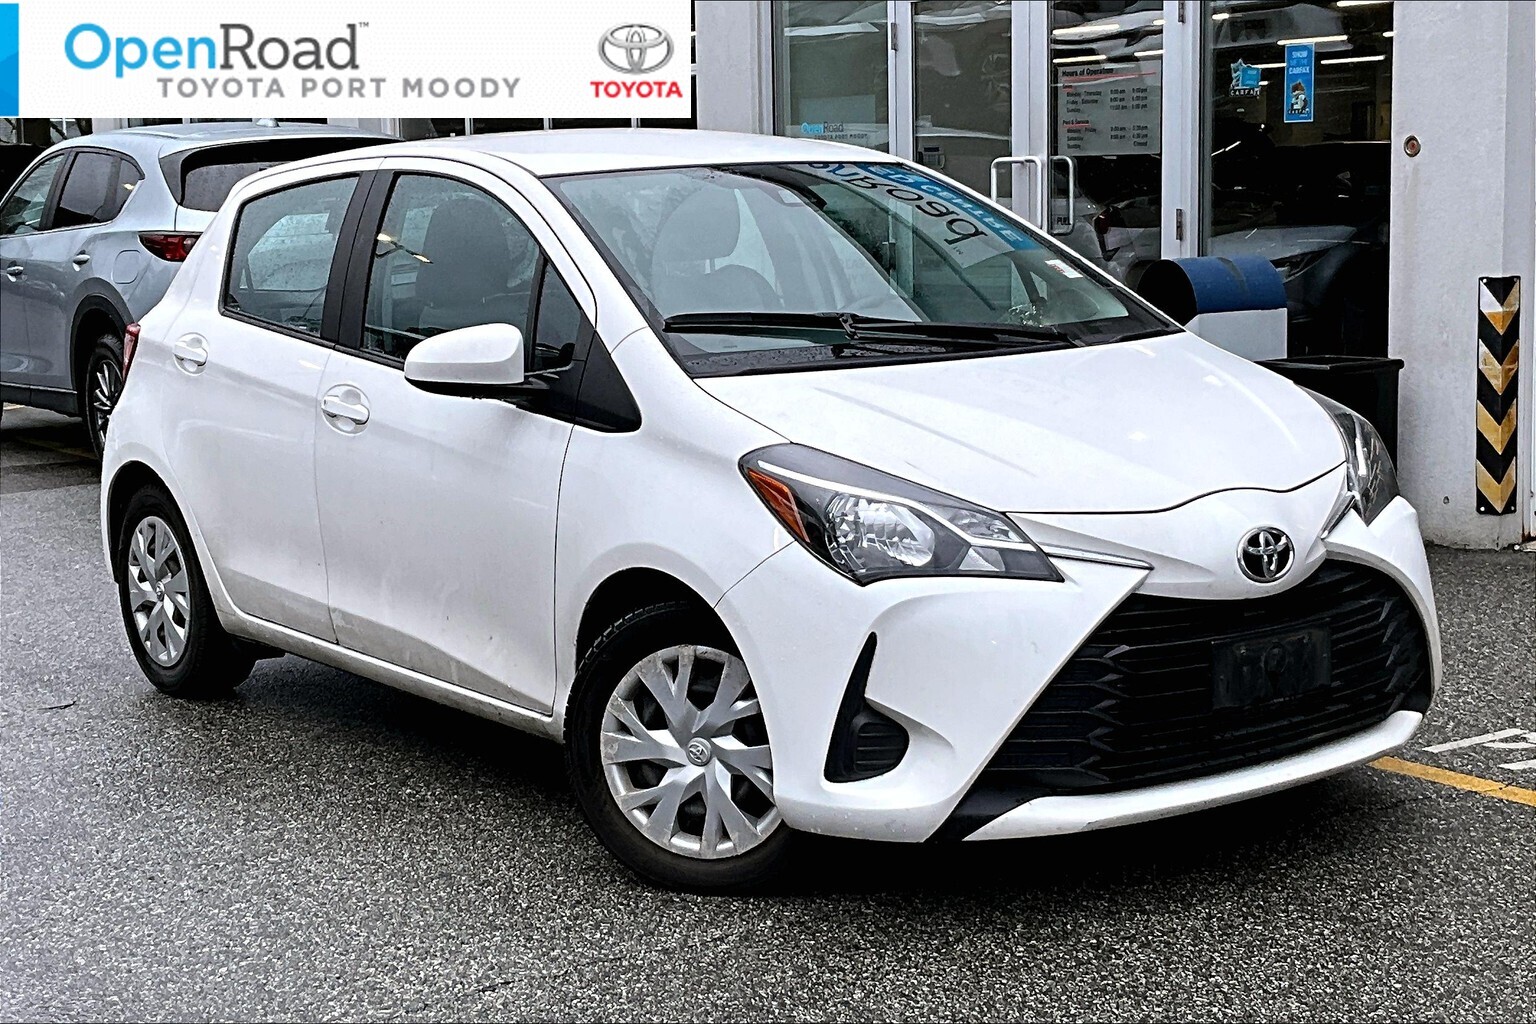 2018 Toyota Yaris 5 Dr LE Htbk 4A |OpenRoad True Price |Local |One O